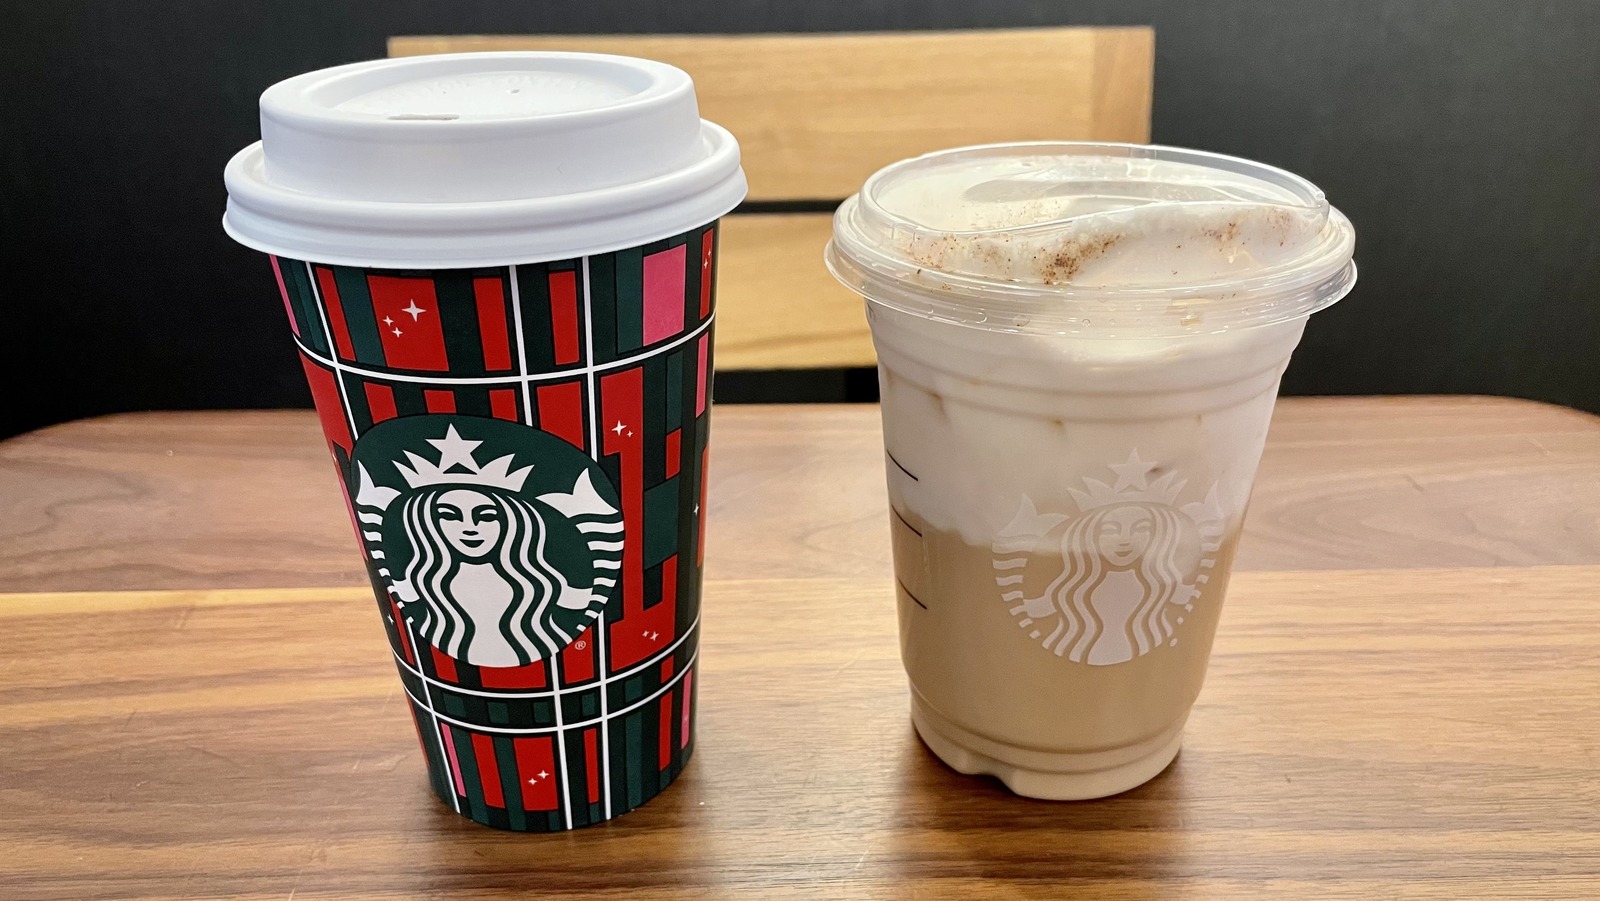 https://www.mashed.com/img/gallery/we-tried-starbucks-new-gingerbread-oatmilk-chai-and-it-is-a-sugar-bomb/l-intro-1699016606.jpg